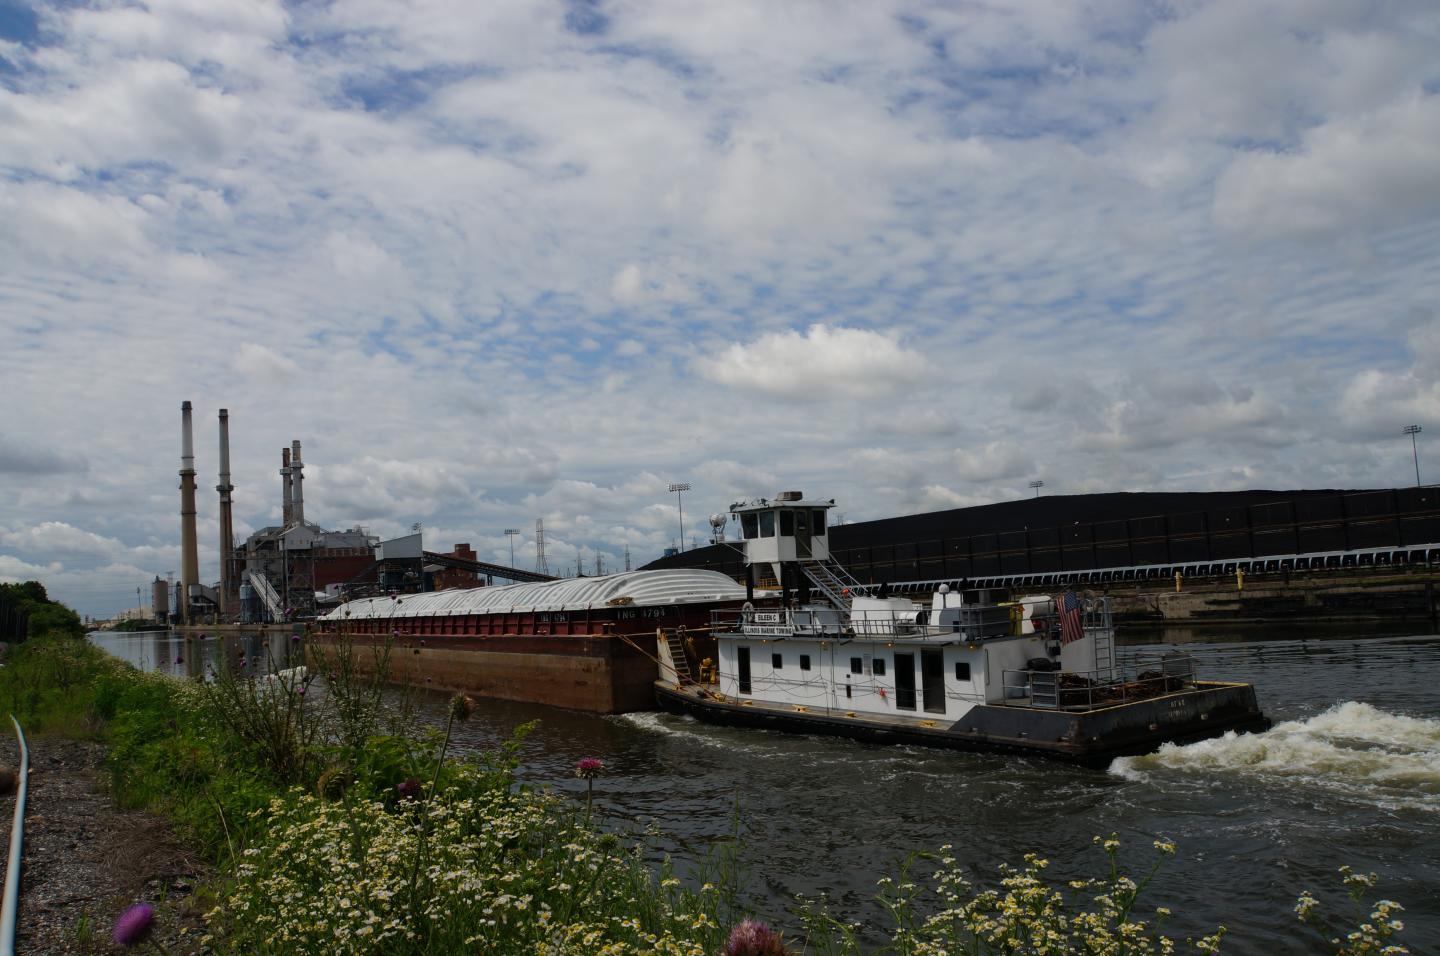 Tugboat on the Chicago Sanitary and Ship Canal